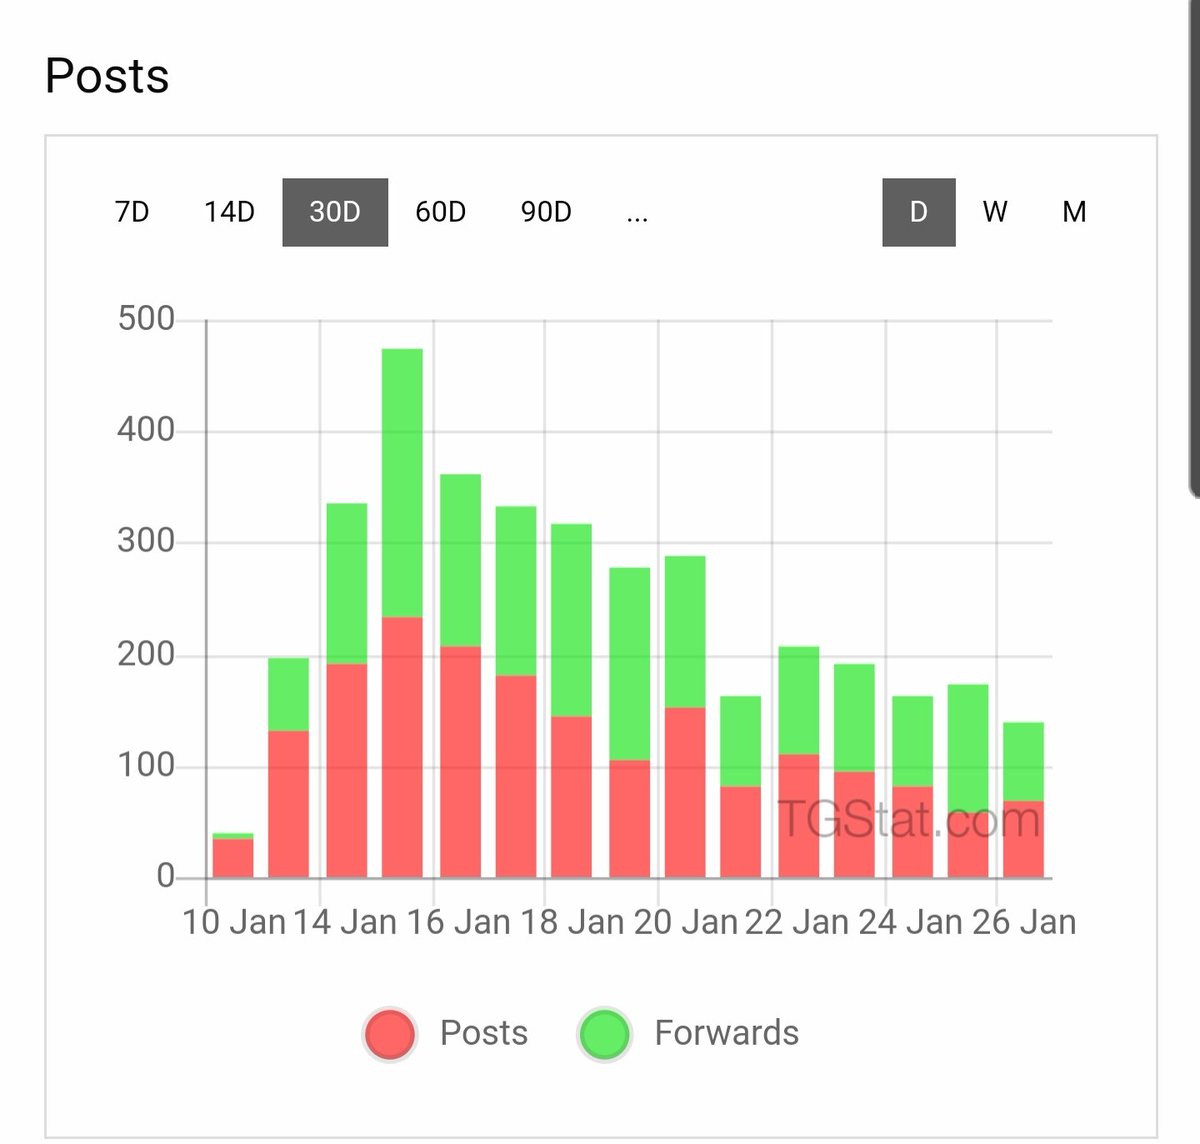 2/ There has also been a fair amount of post forwarding that has been taking place in these channels as their content is spread. The comments per posts have also appeared to increase and the volume of messages per days in chats associated to the channels are steady or increasing